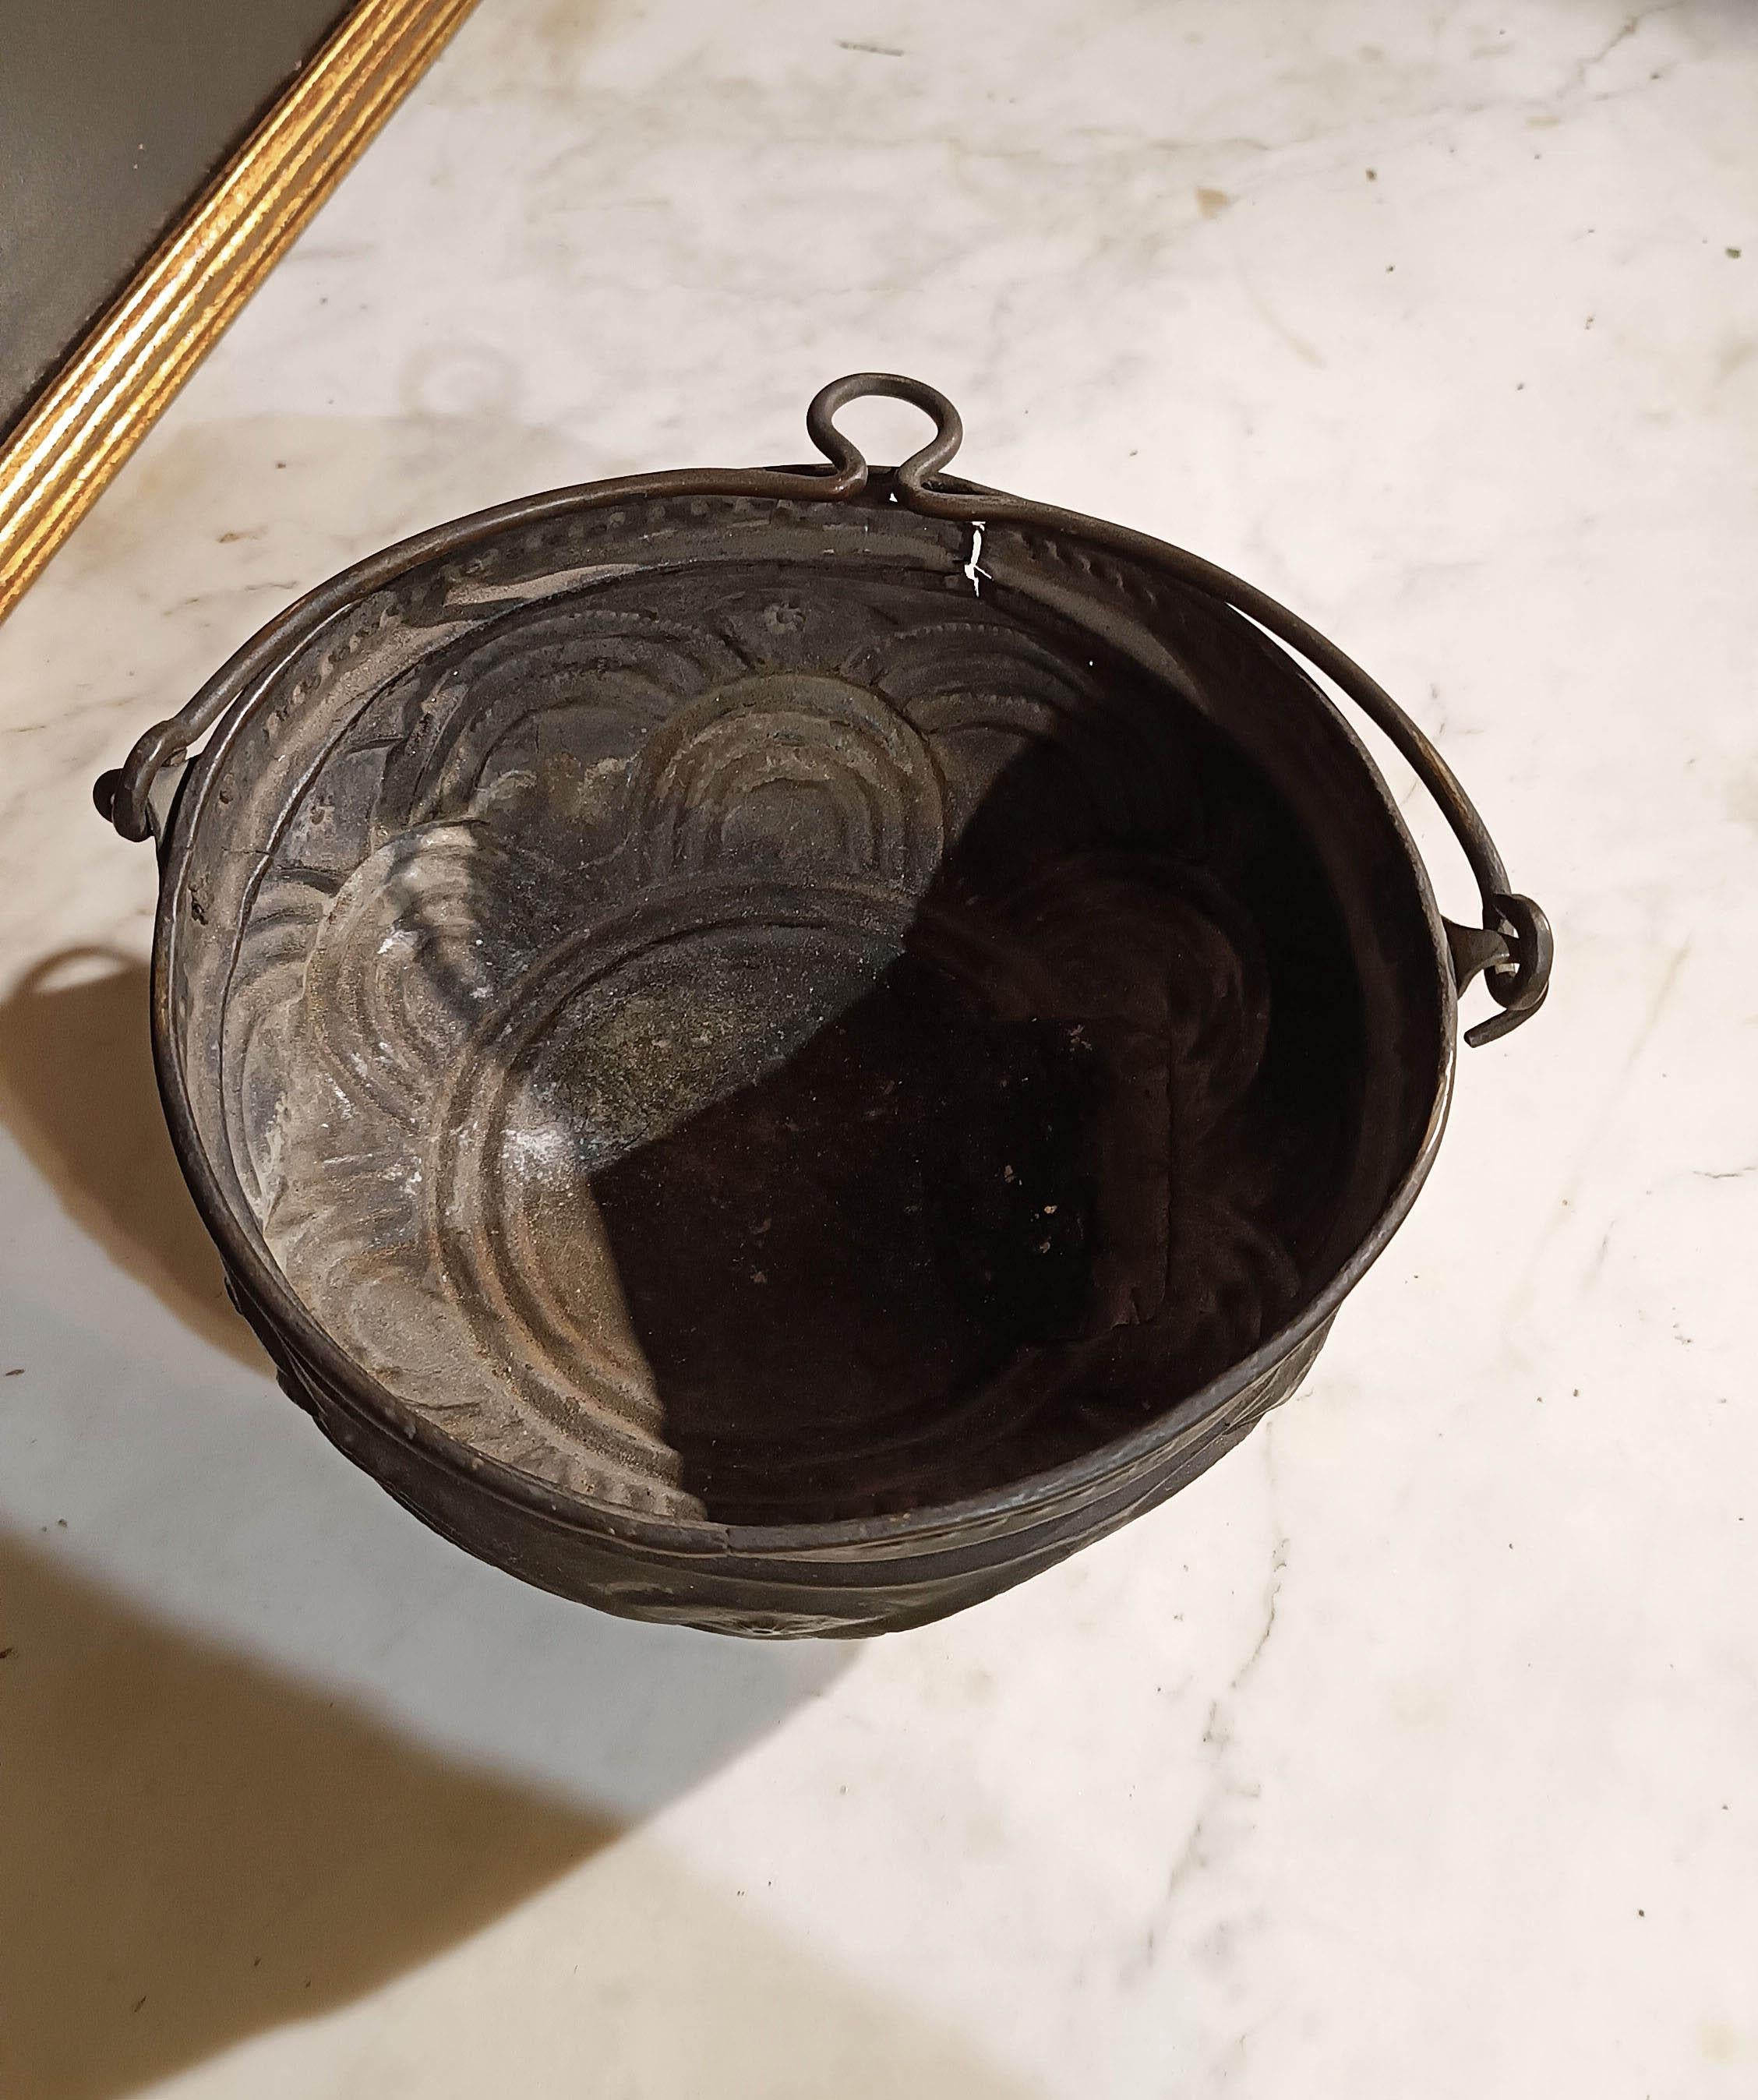 END OF THE 15th CENTURY SMALL HAND WARM BRAZIER For Sale 2